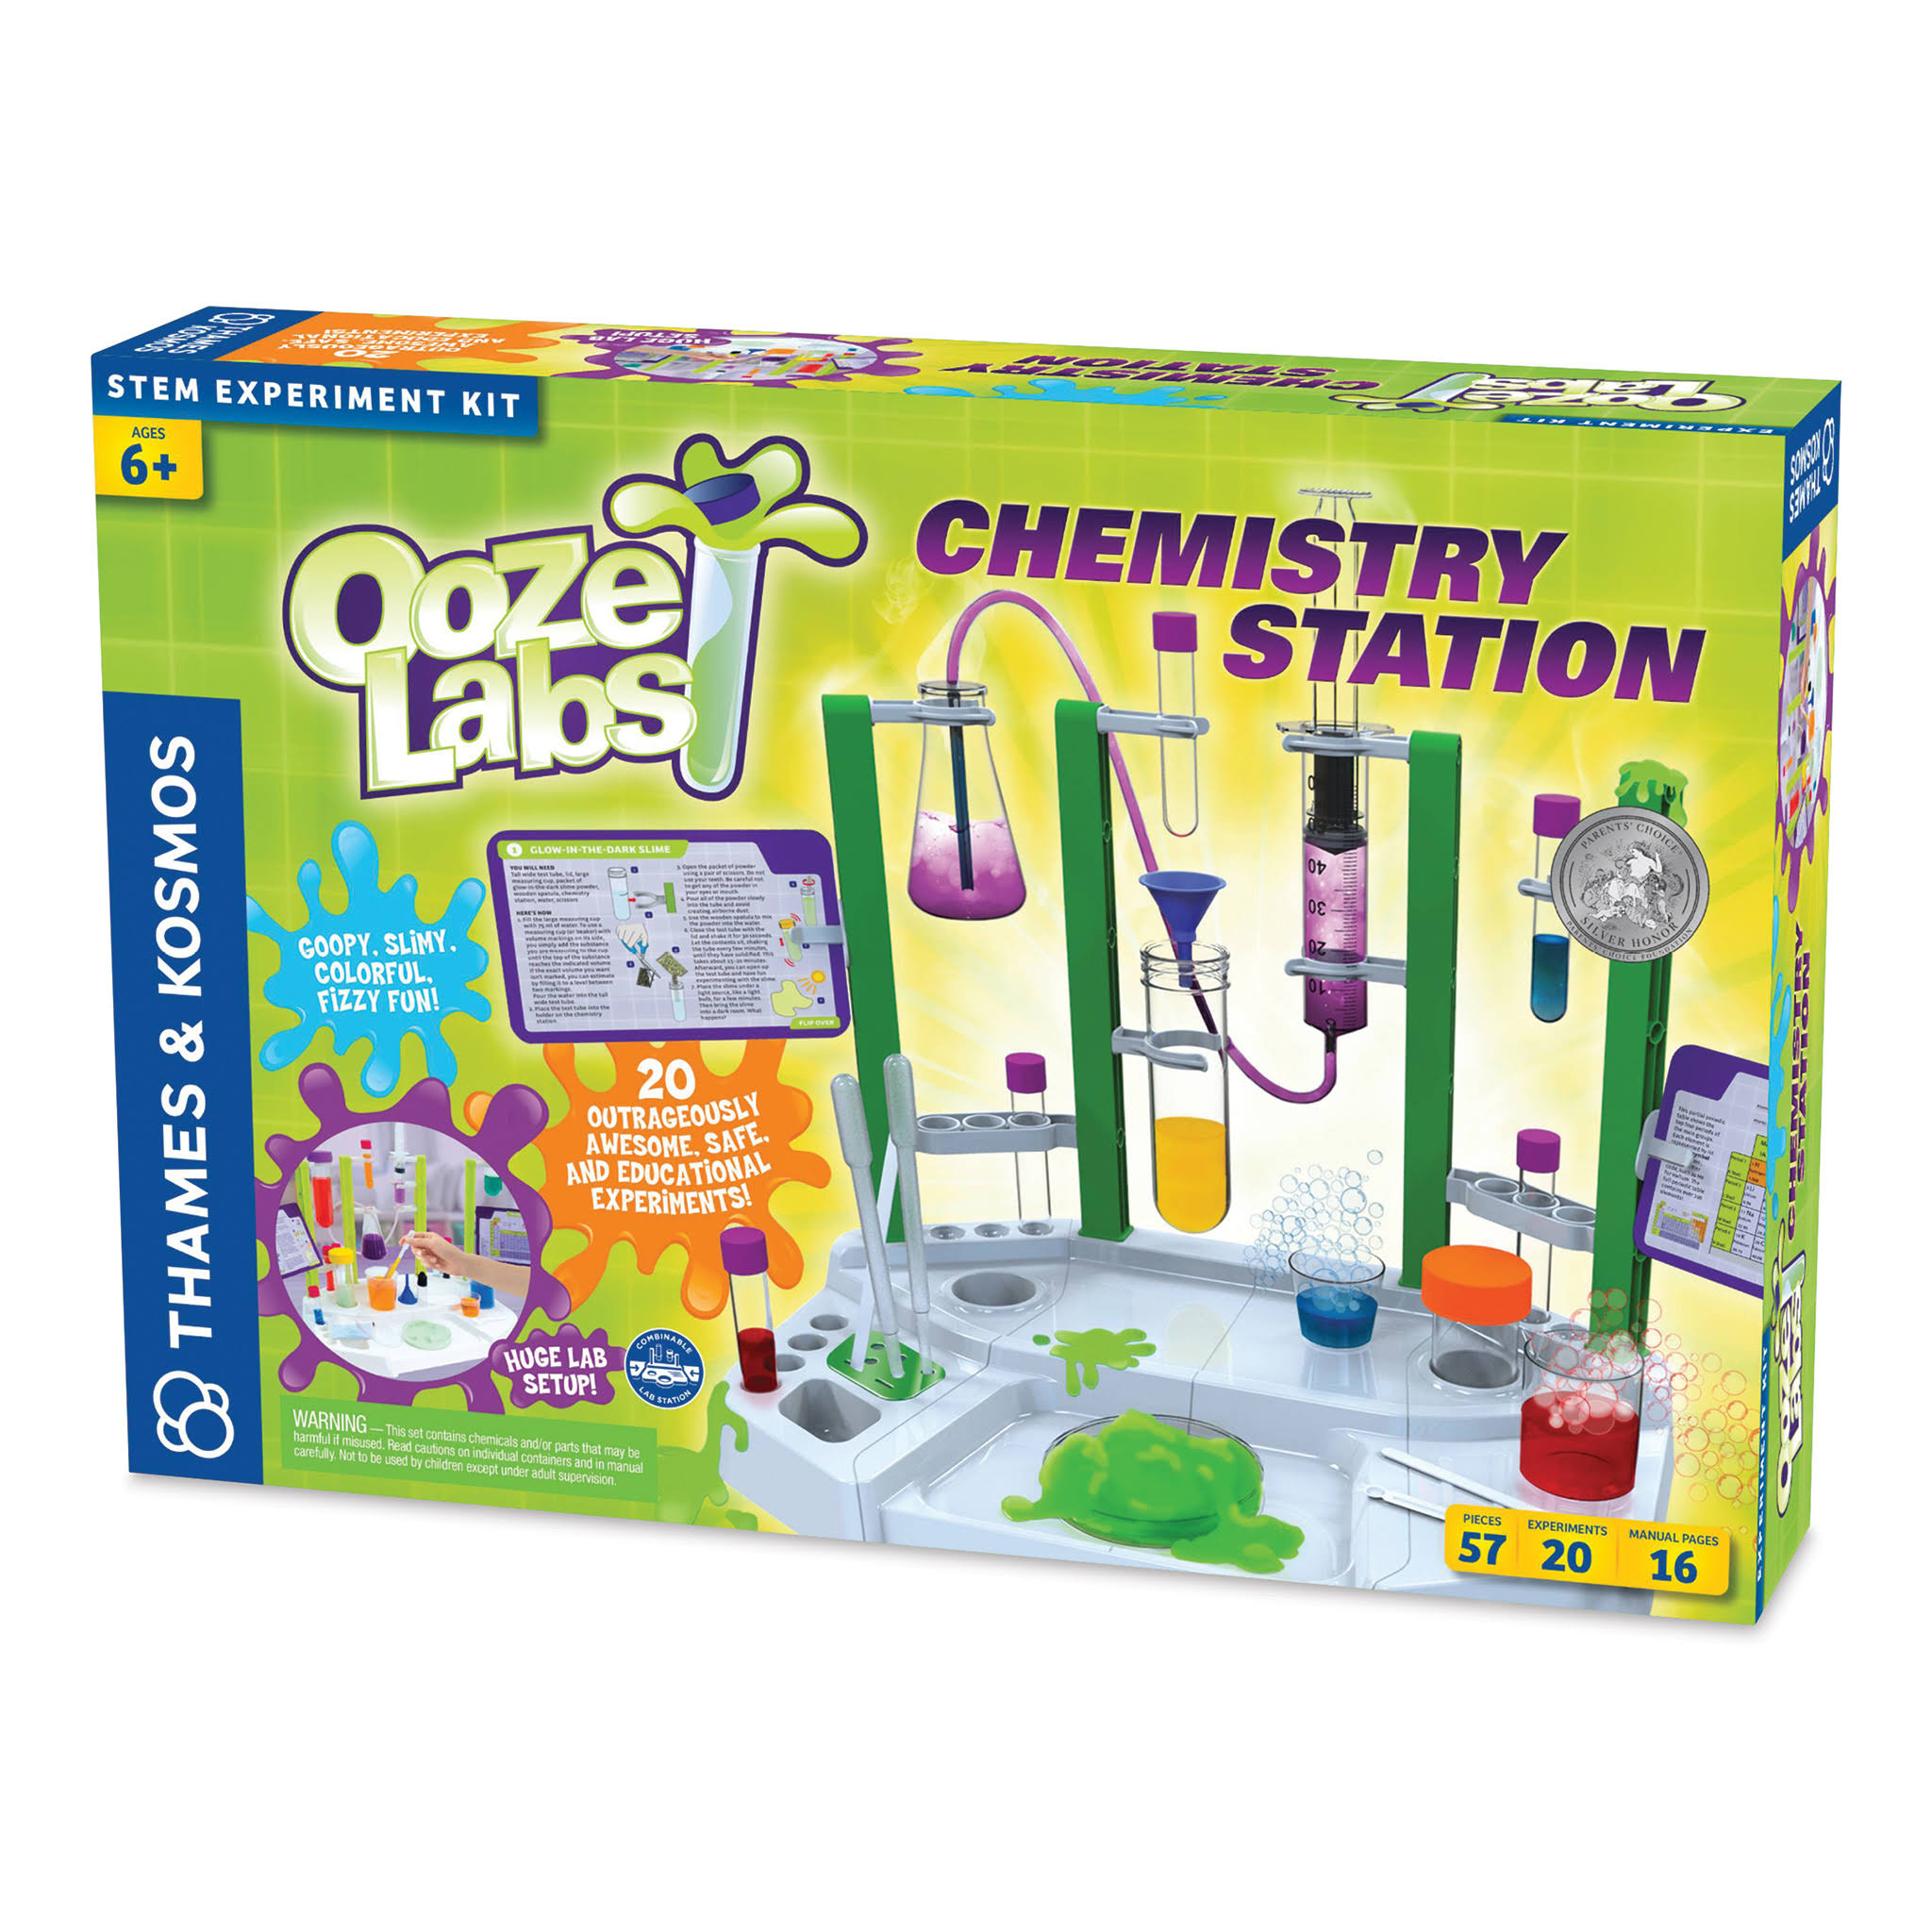 Thames and Kosmos Ooze Labs Chemistry Station Experiment Kit